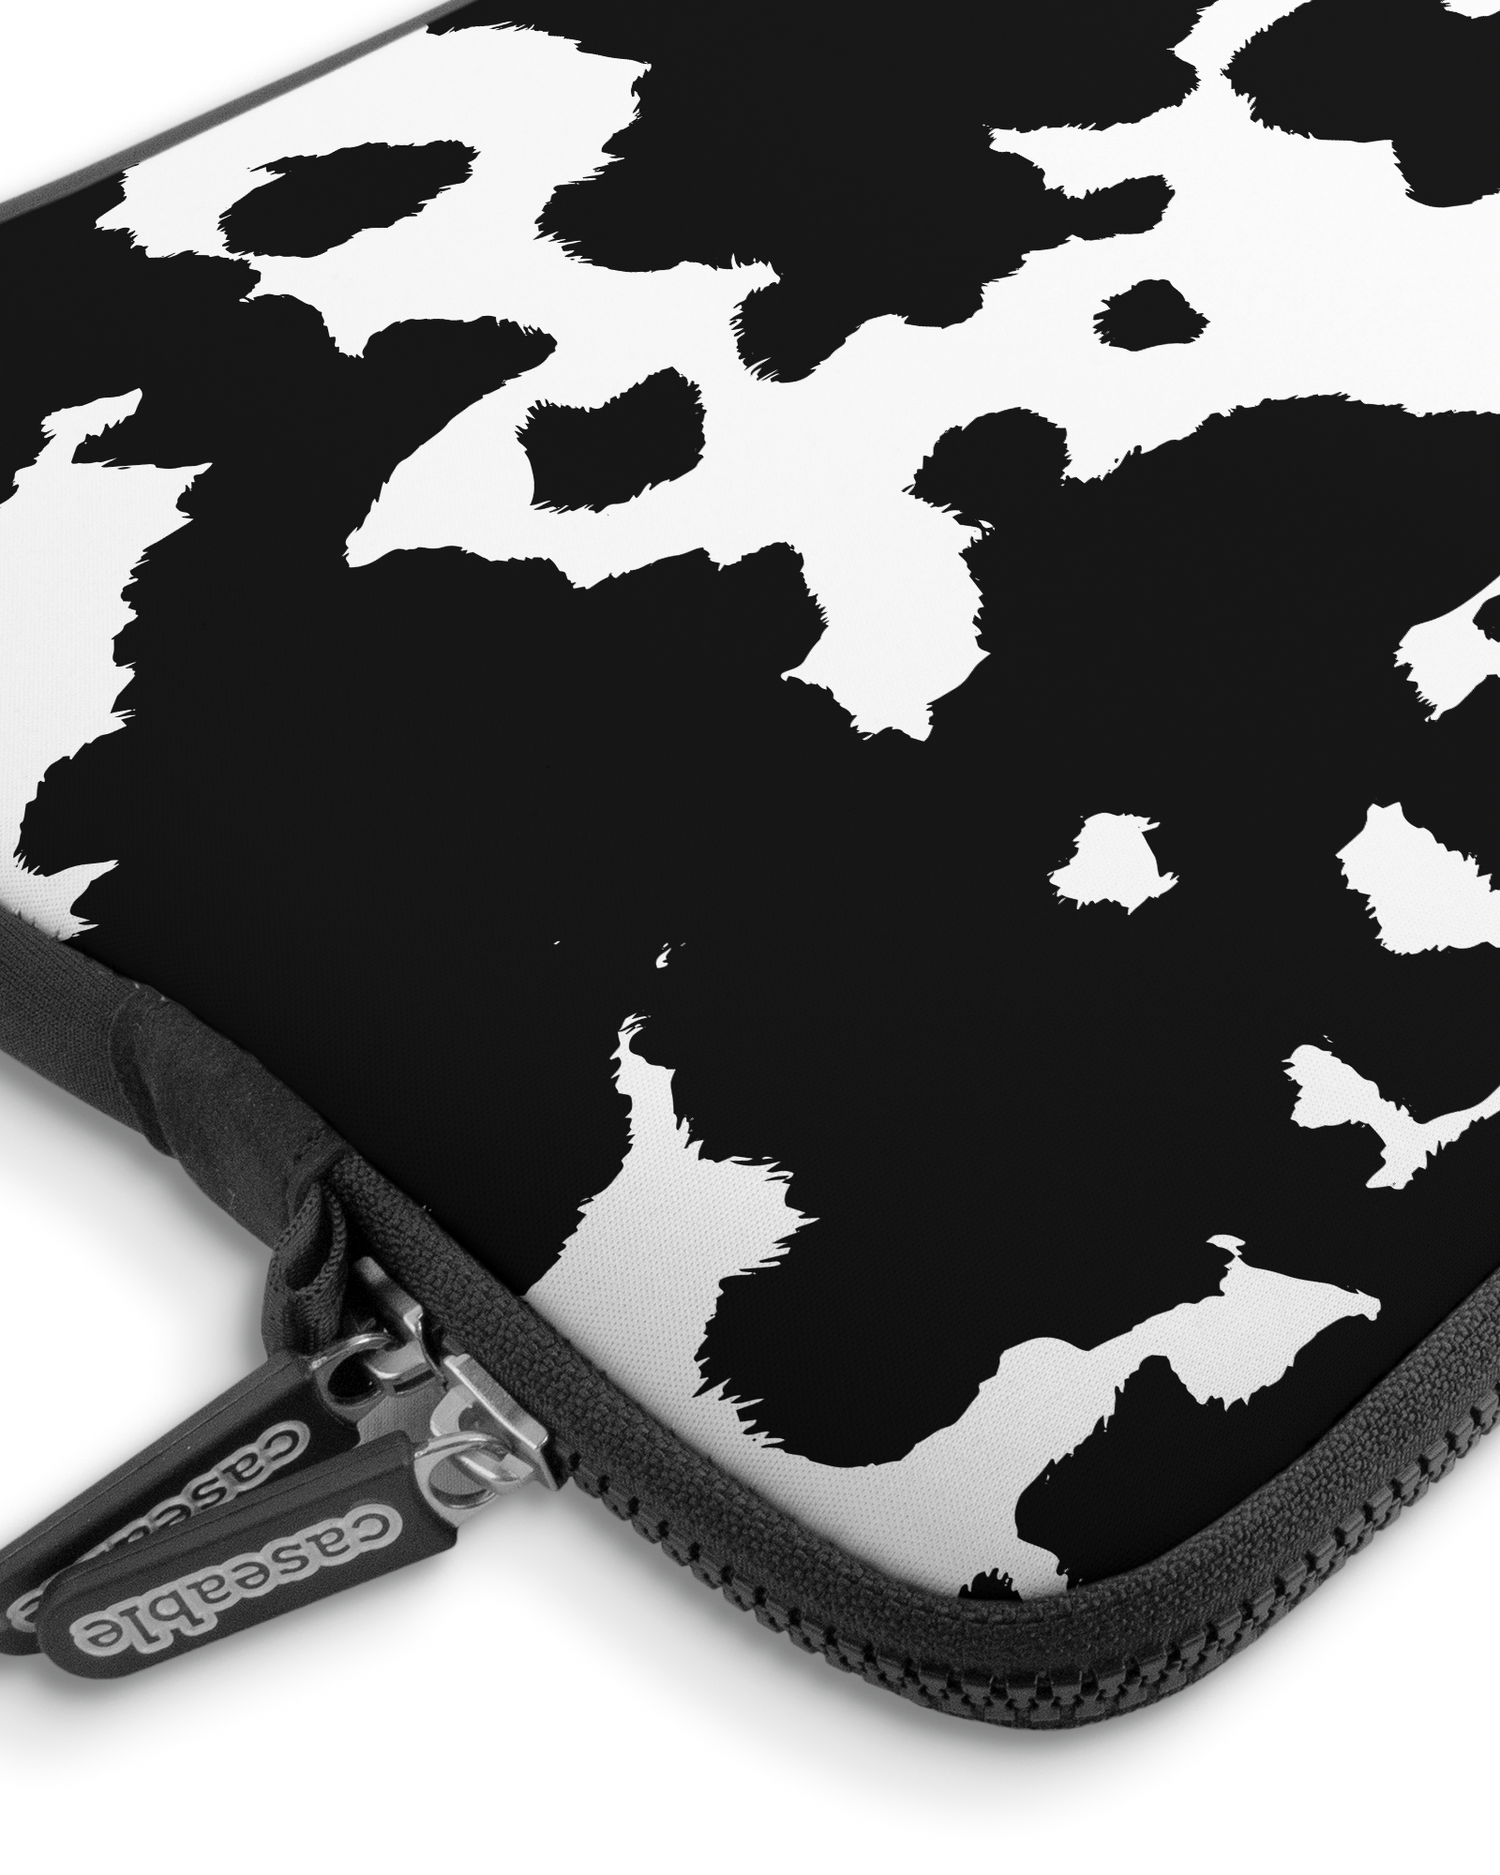 Cow Print Premium Laptop Bag 13-14 inch with device inside